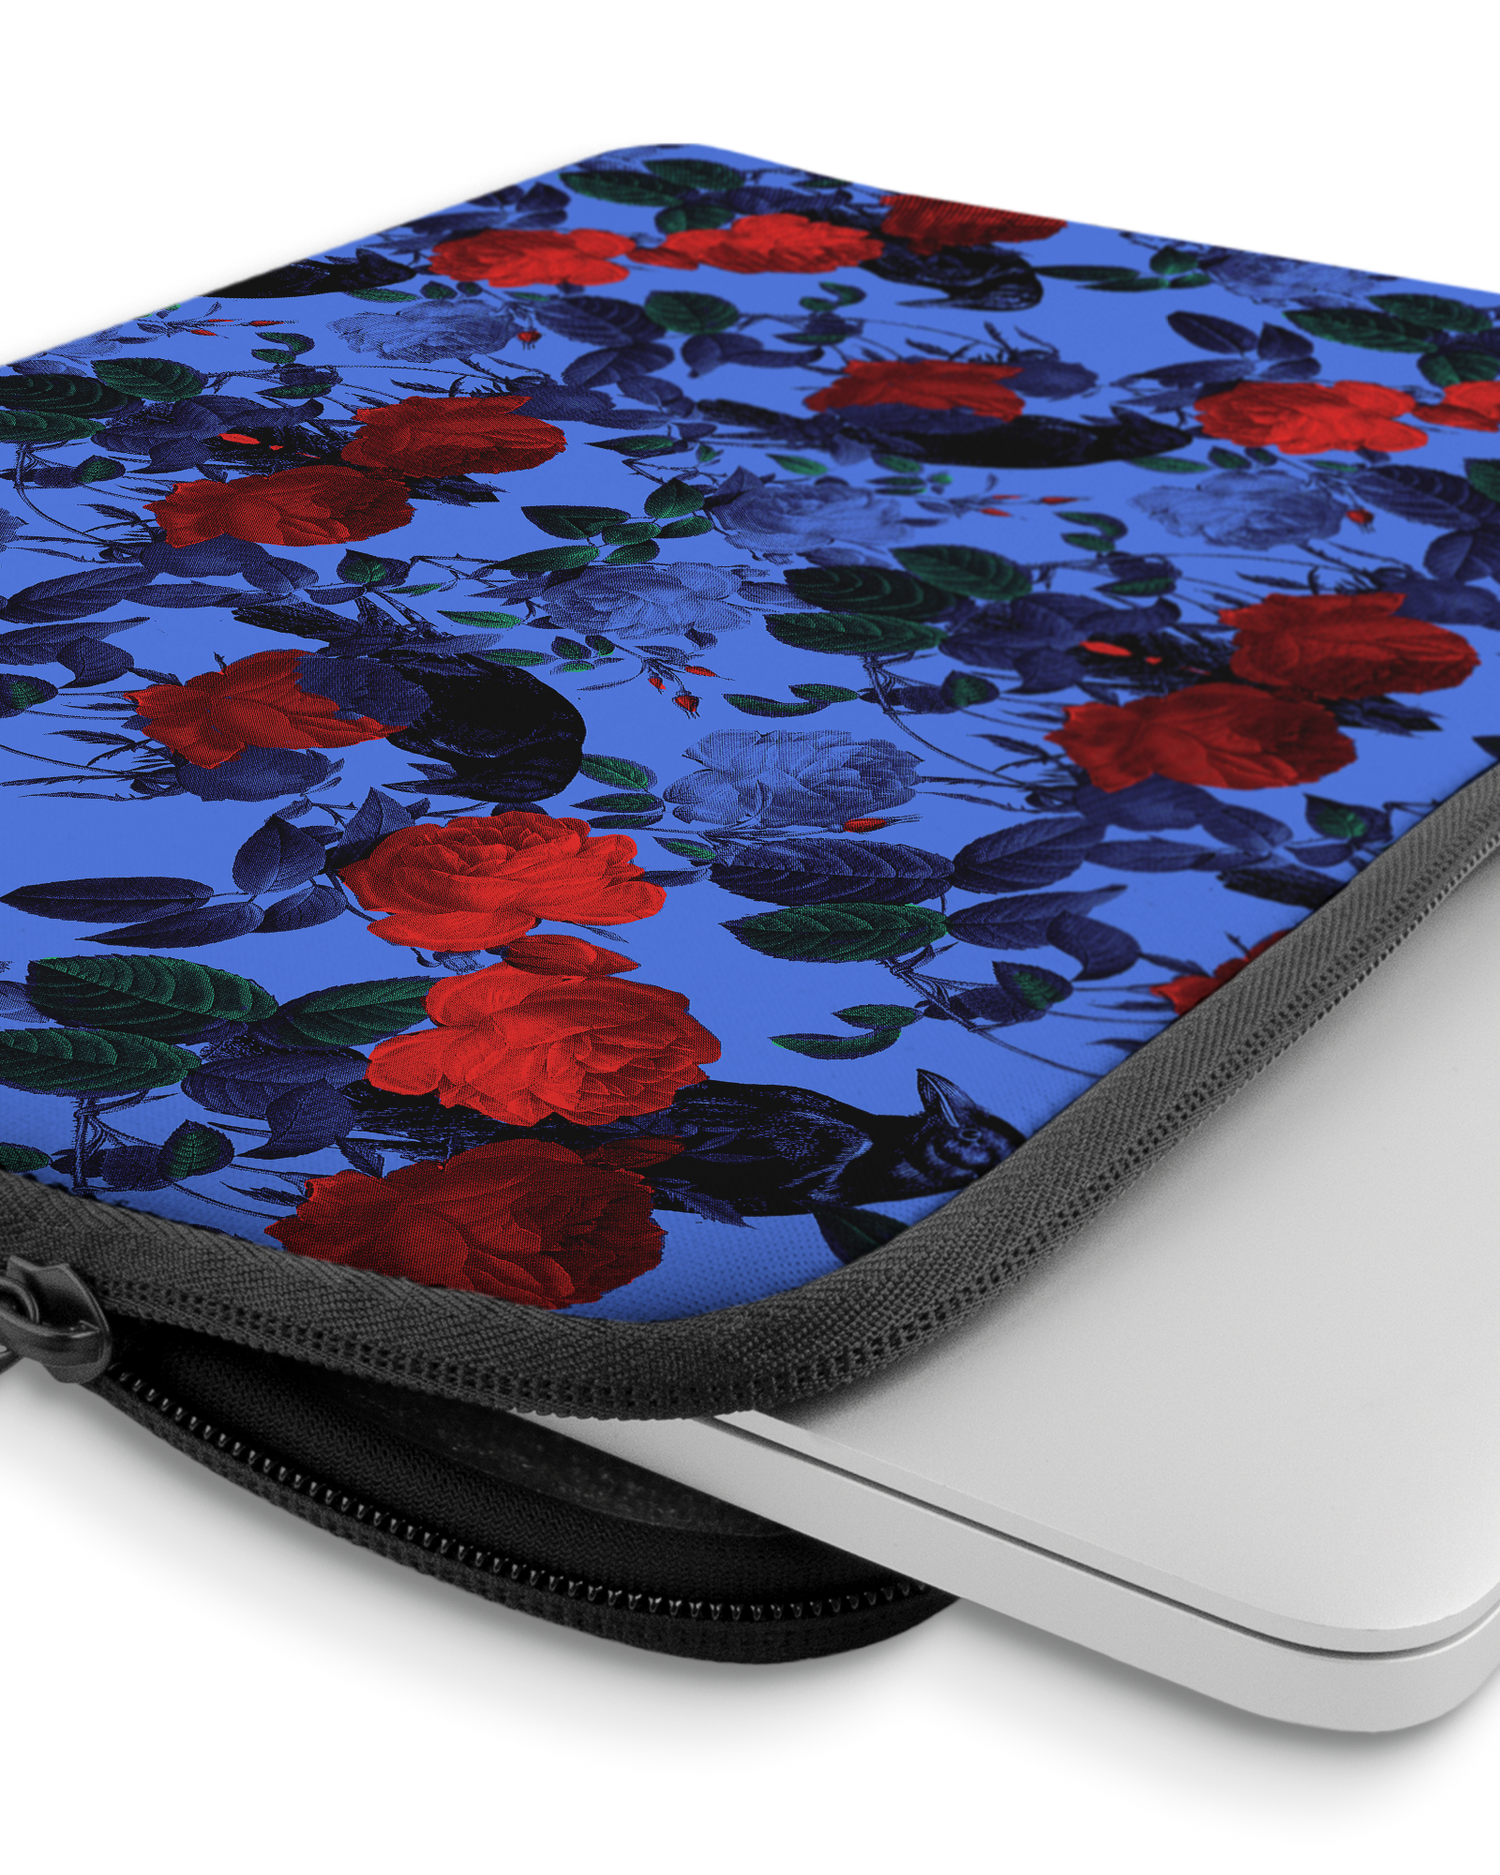 Roses And Ravens Laptop Case 13-14 inch with device inside